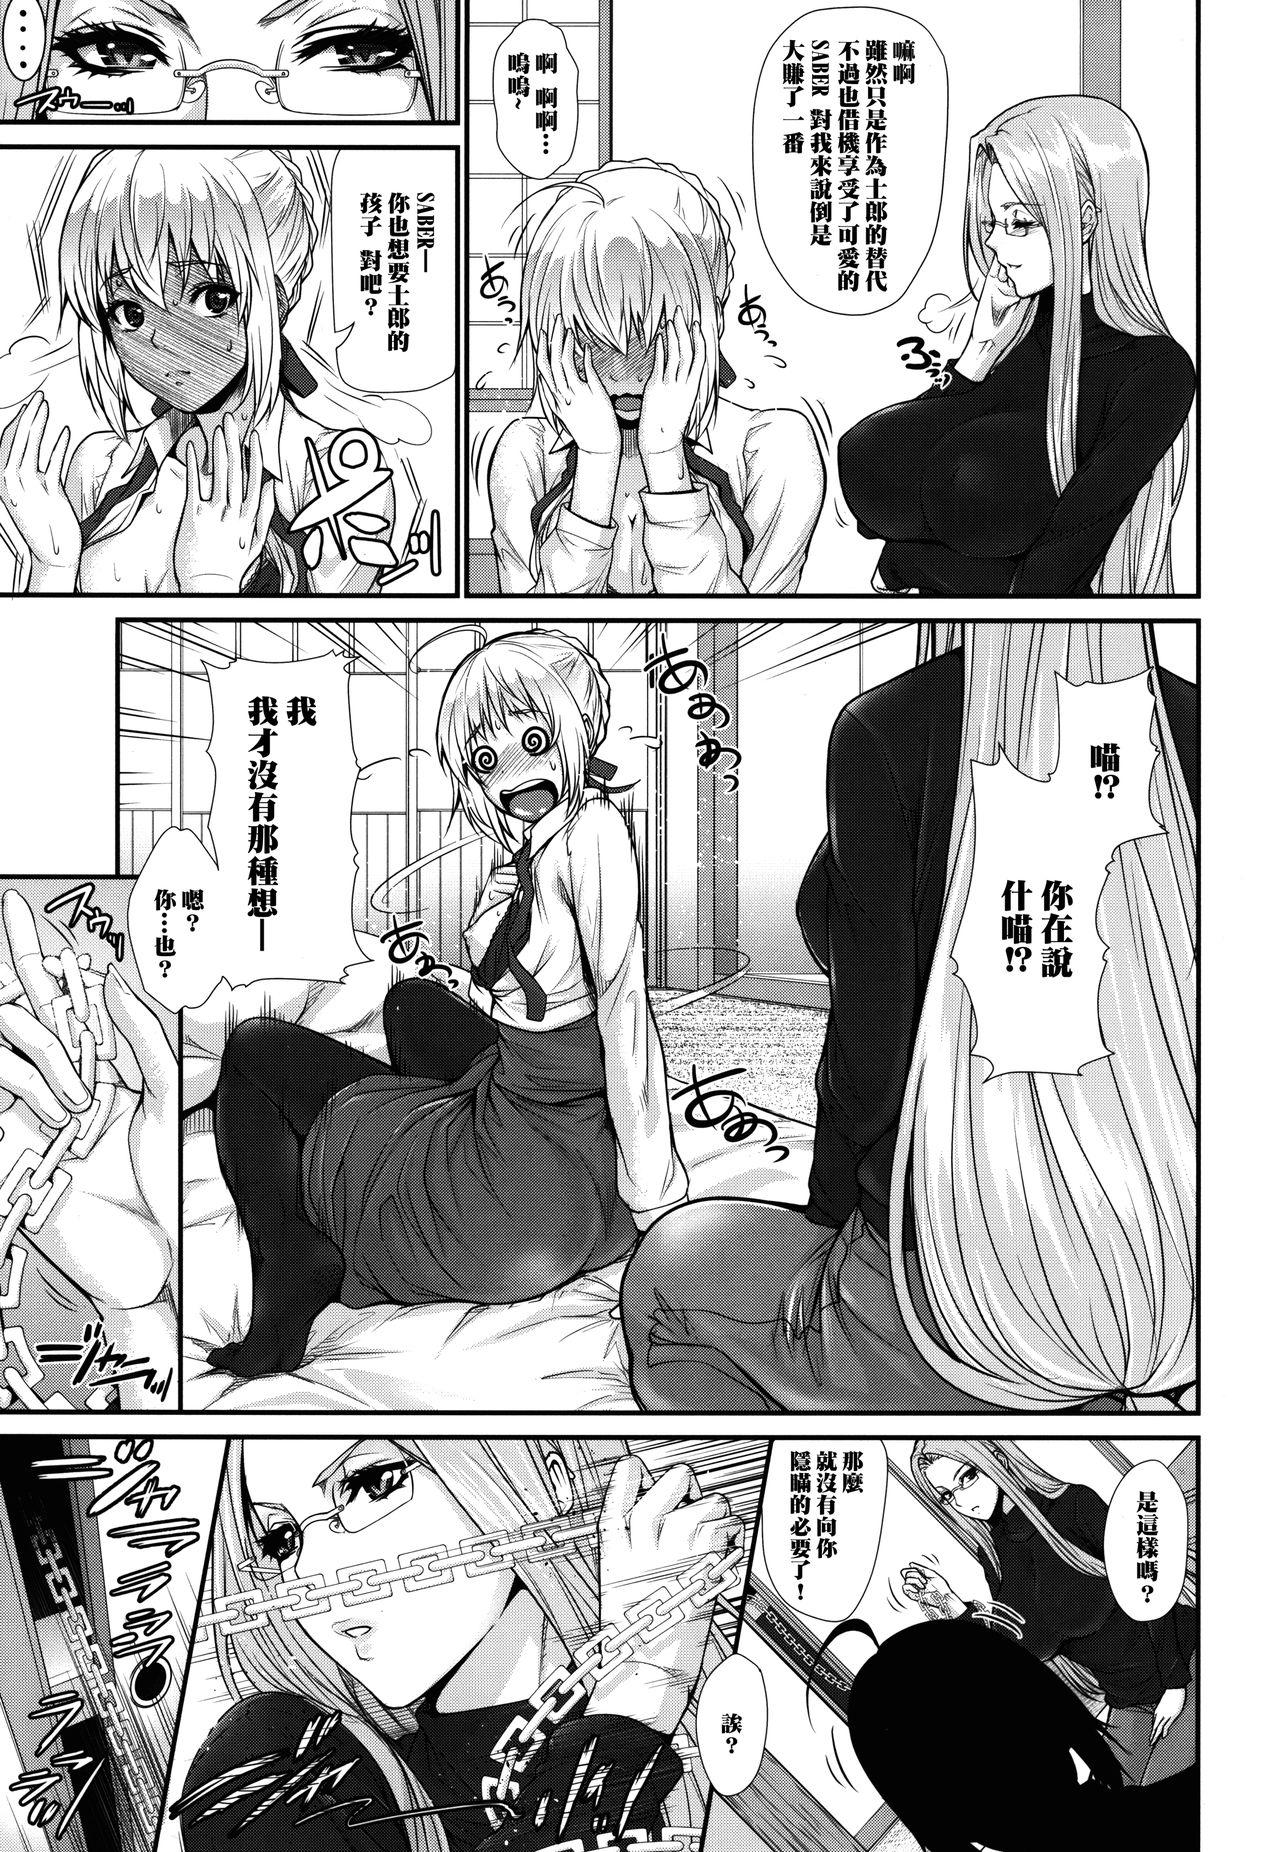 Transsexual Shirou-kun Harem!! Servant Hen - Fate stay night Old Man - Page 7